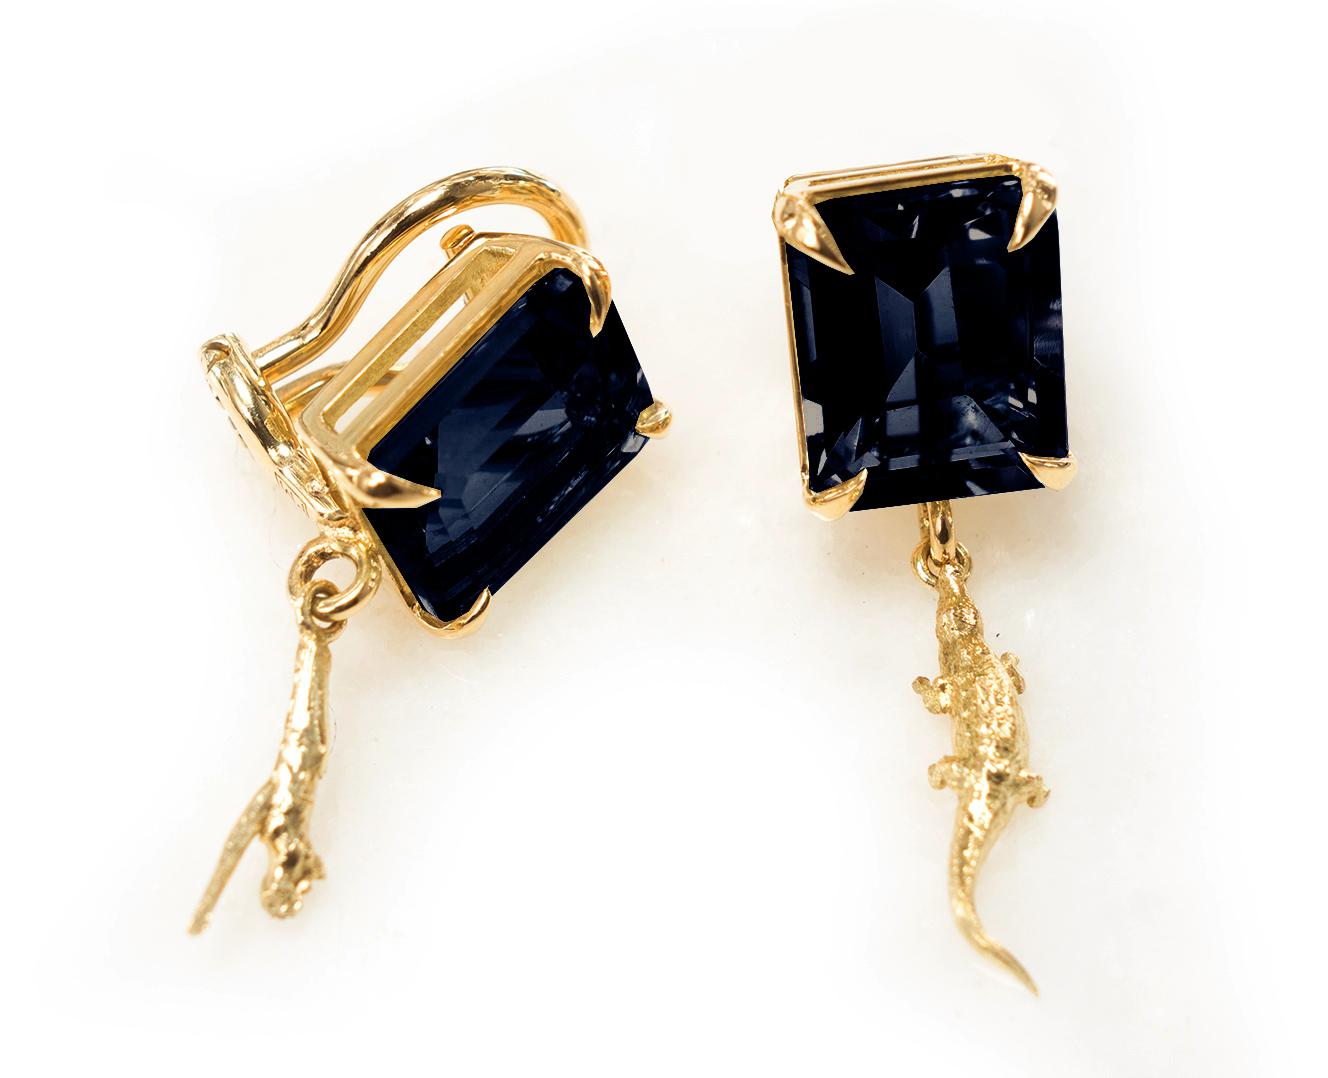 These elegant stud earrings with octagon-cut dark sapphires (8x6 mm) are part of the Tea collection, which was featured in Vogue UA. The earrings are crafted from 18 karat yellow gold and designed by the Berlin-based painter and jewelry designer